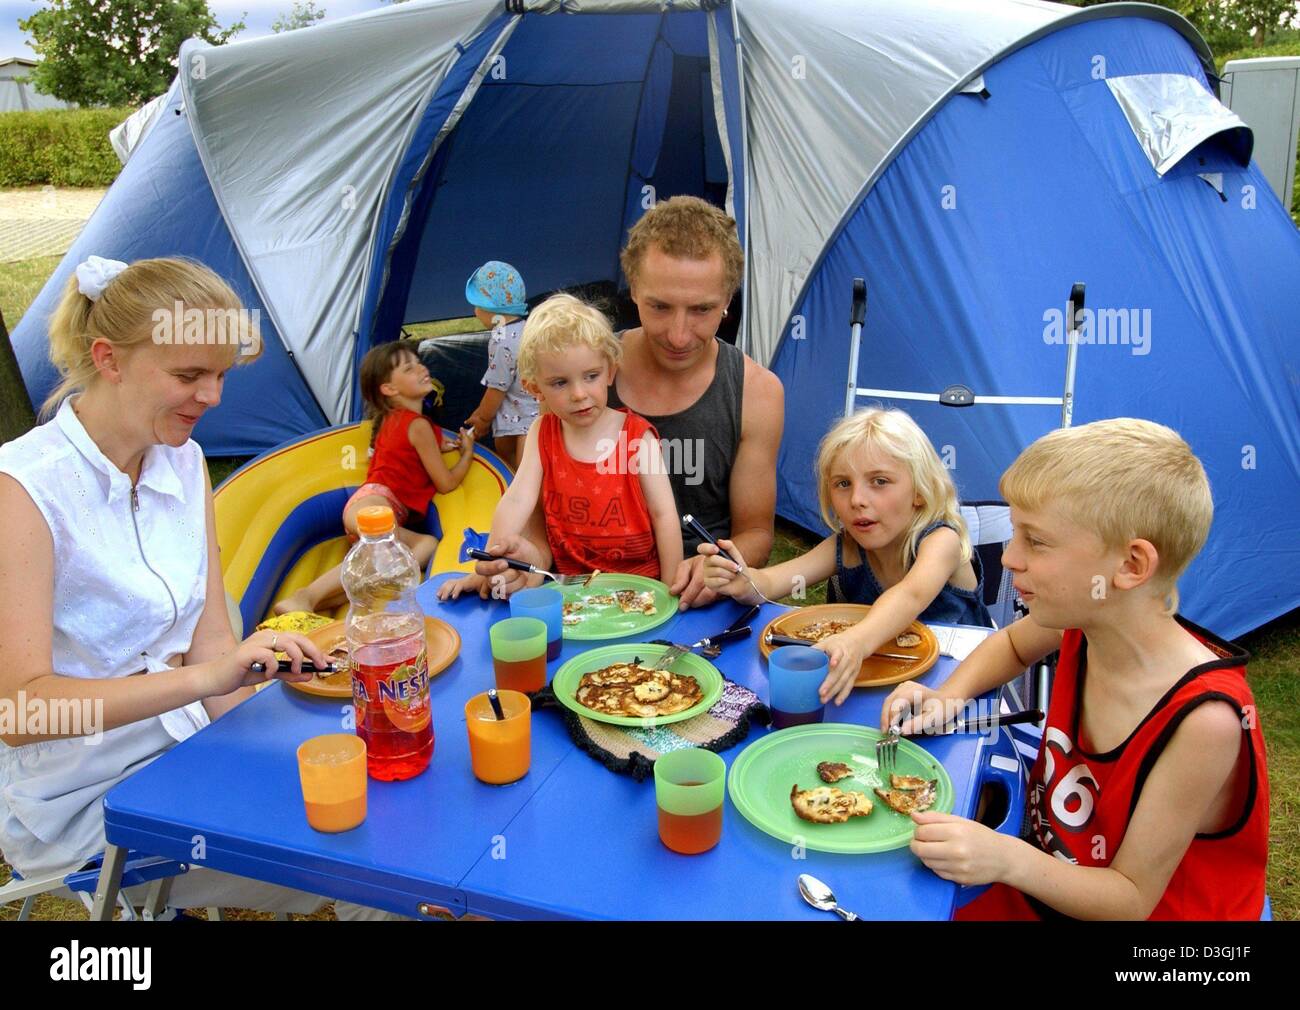 (dpa) - The Schimke family eat their pancakes during their holidays on the Gunzenberg camping site near Poehl dam, eastern Germany, 5 August 2004. The reservoir lake is one of the most attractive destinations for tourists in the Vogtland region. Stock Photo